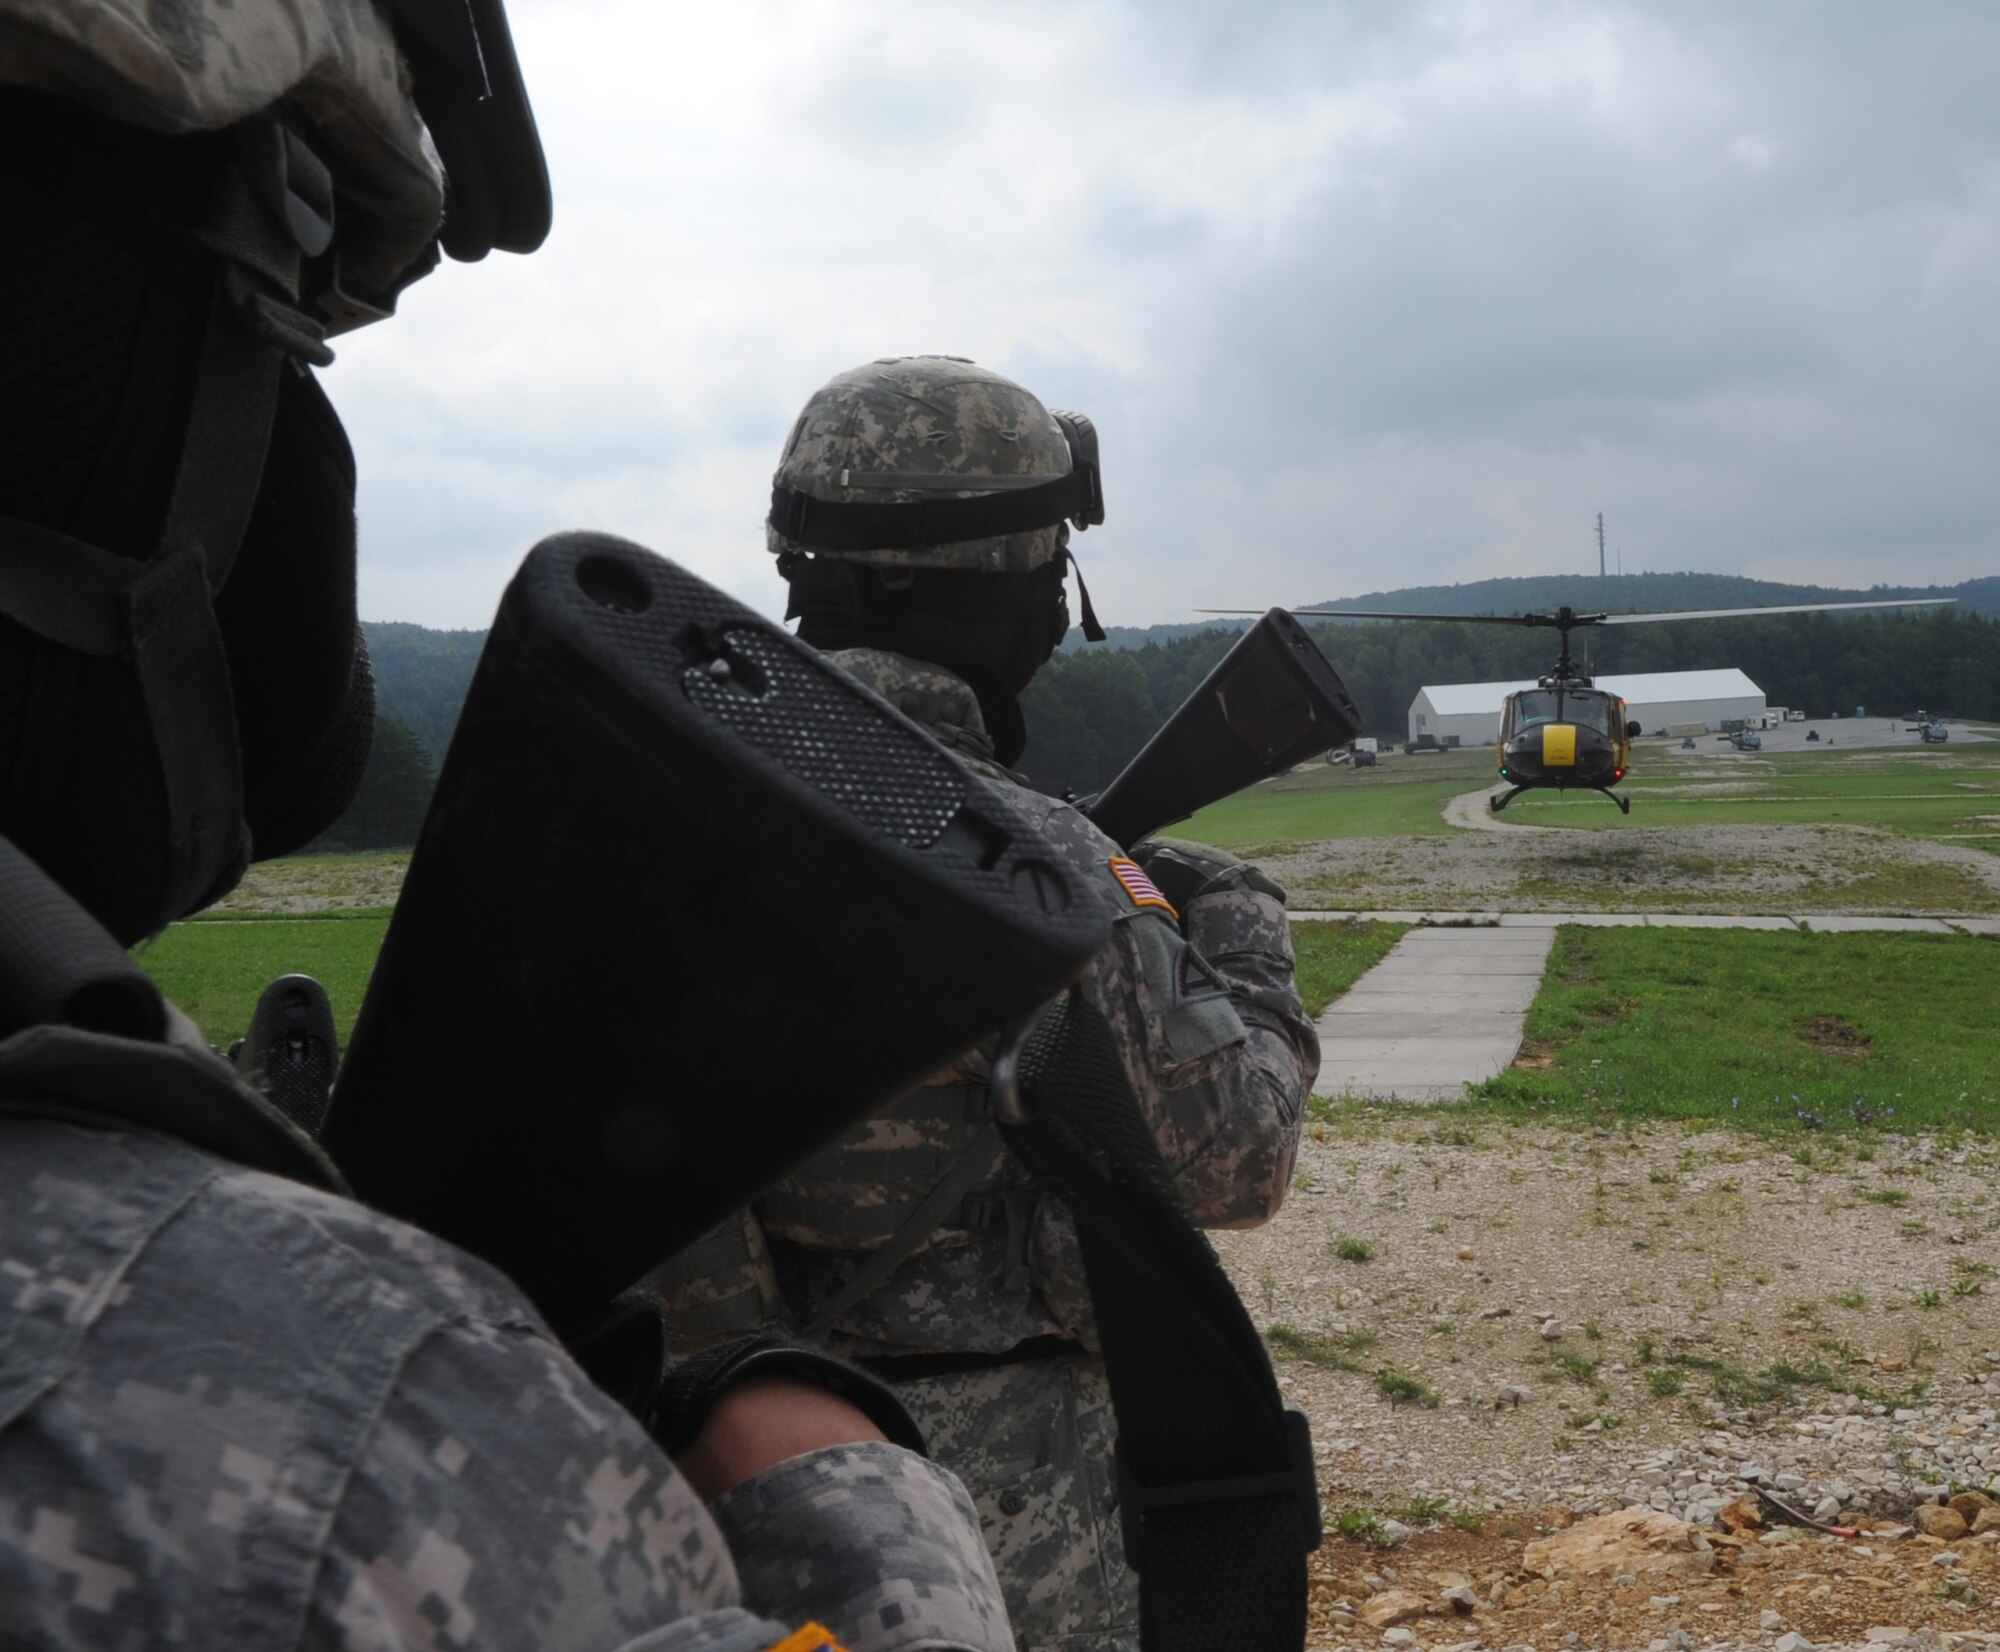 A U.S. Army squad waits to load in a Huey for an air assault mission scenario during exercise ALLIED STRIKE 10, Hohenfels, Germany, Aug. 3, 2010. AS 10 is Europe's premier close air support (CAS) exercise, held annually to conduct robust, realistic CAS training that helps build partnership capacity among allied North Atlantic Treaty Organization nations and joint services while refining the latest operational CAS tactics. For more ALLIED STRIKE information go to www.usafe.af.mil/alliedstrike.asp. (U.S. Air Force photo by Senior Airman Caleb Pierce)